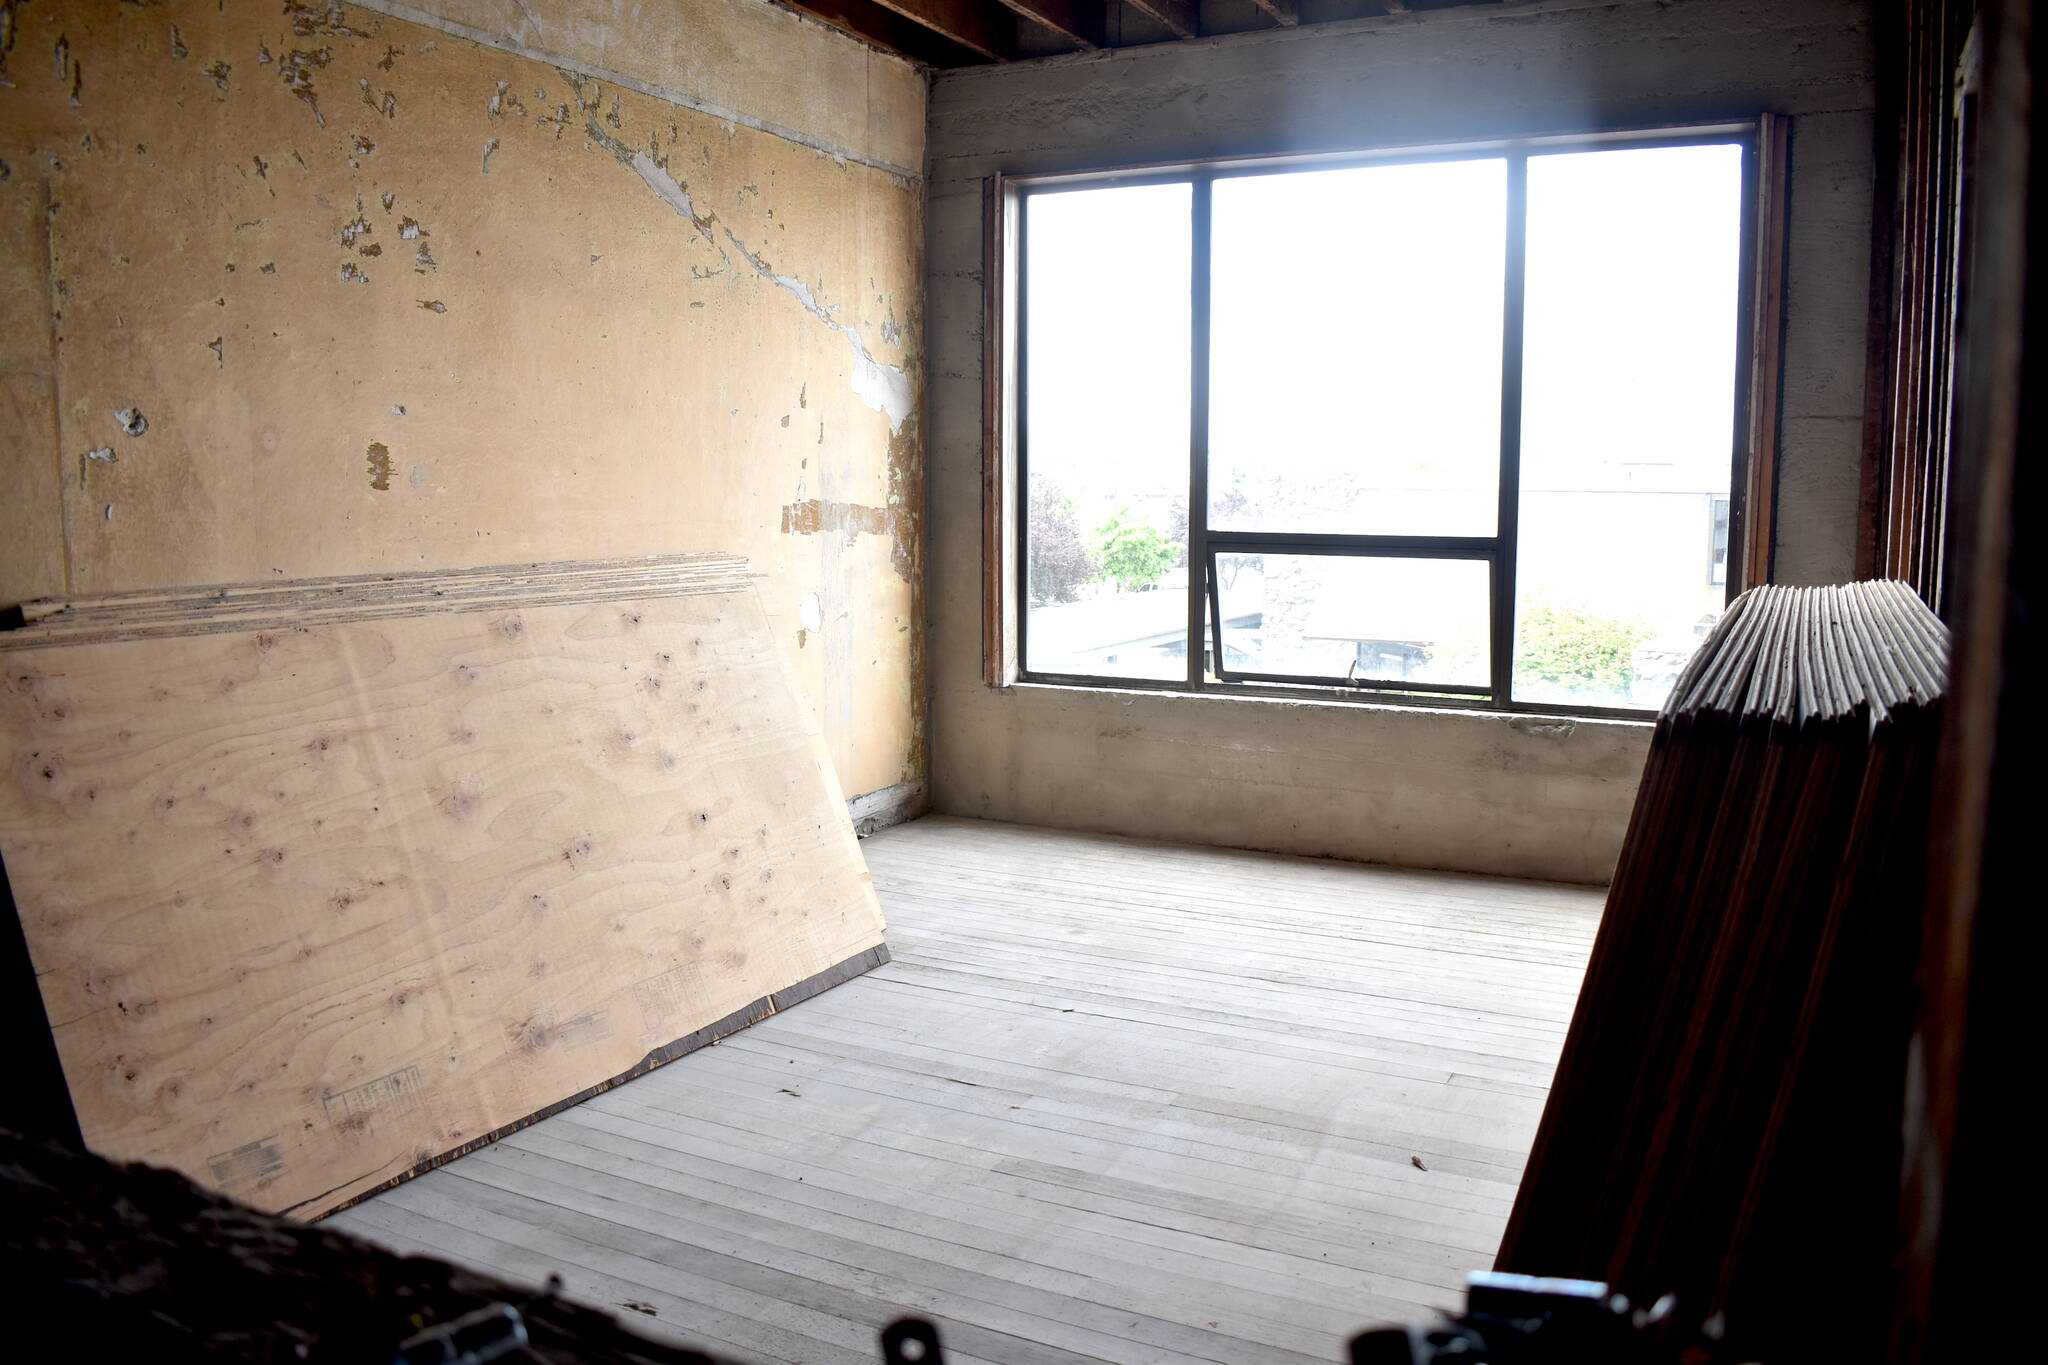 A look at the bones of a future executive suite inside the historic La Vogue building in downtown Hoquiam. There are plans to make 13 executive suite — between 500-600 square feet. The suites will have a living room, a bedroom and a bathroom. There will also be two bridal suites, which are supposed to be built a little bigger. (Matthew N. Wells / The Daily World)